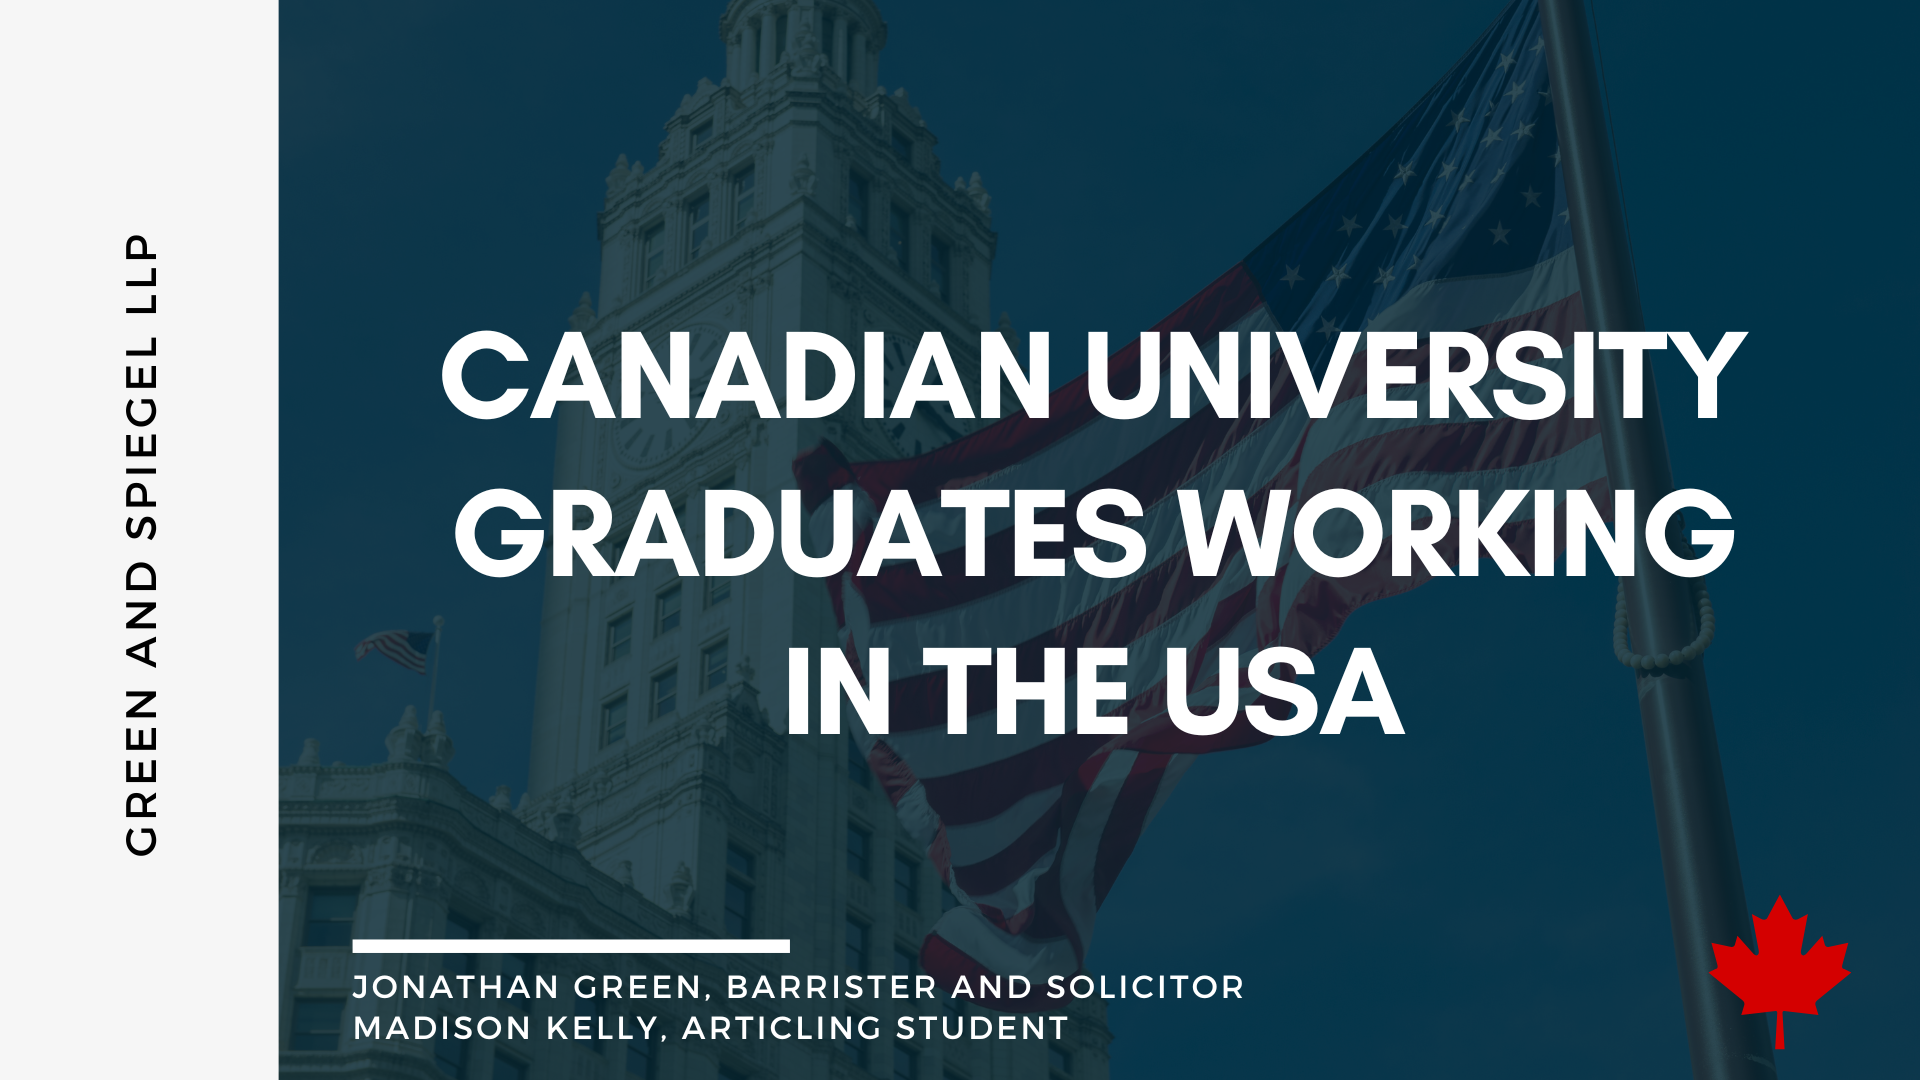 CANADIAN UNIVERSITY GRADUATES WORKING IN THE USA